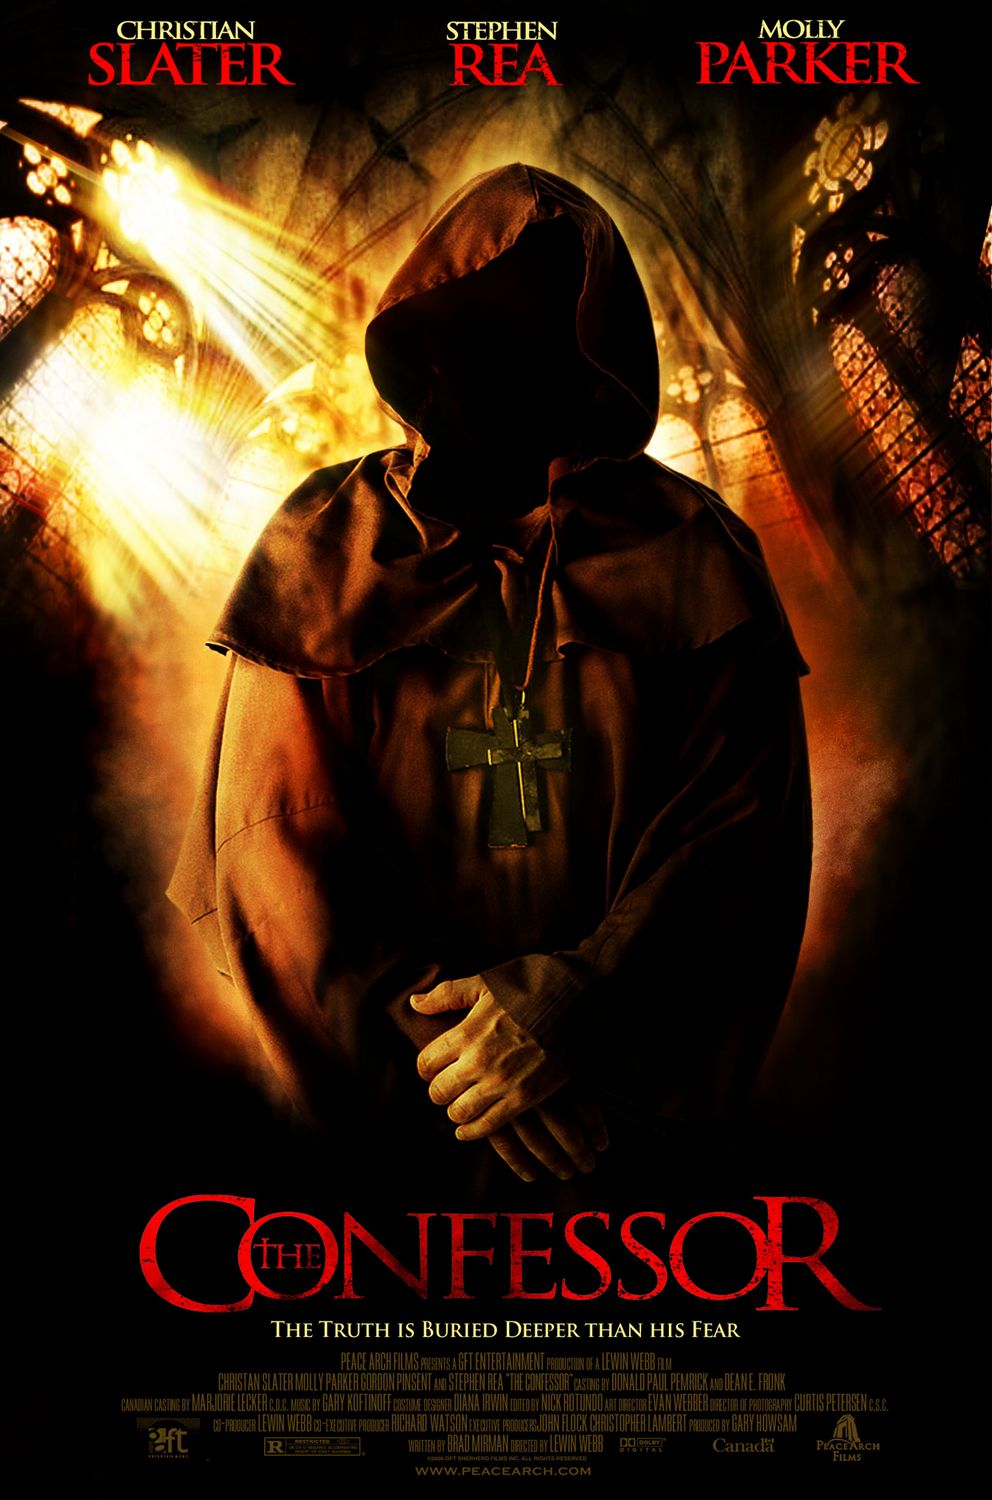 Extra Large Movie Poster Image for The Confessor (aka The Good Shepherd) 